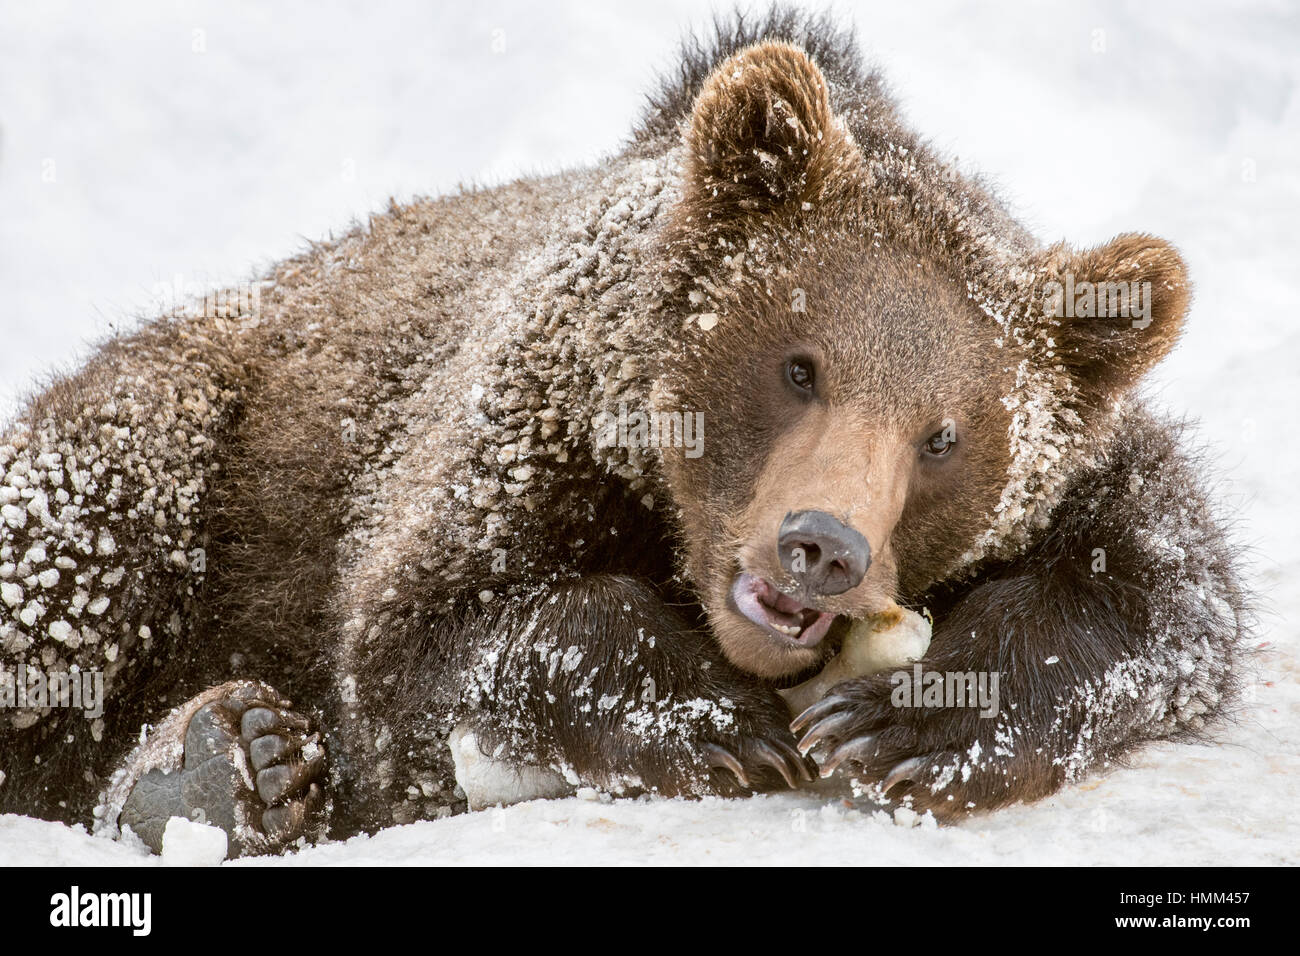 One year old brown bear cub (Ursus arctos arctos) gnawing on knuckle bone in the snow in winter Stock Photo